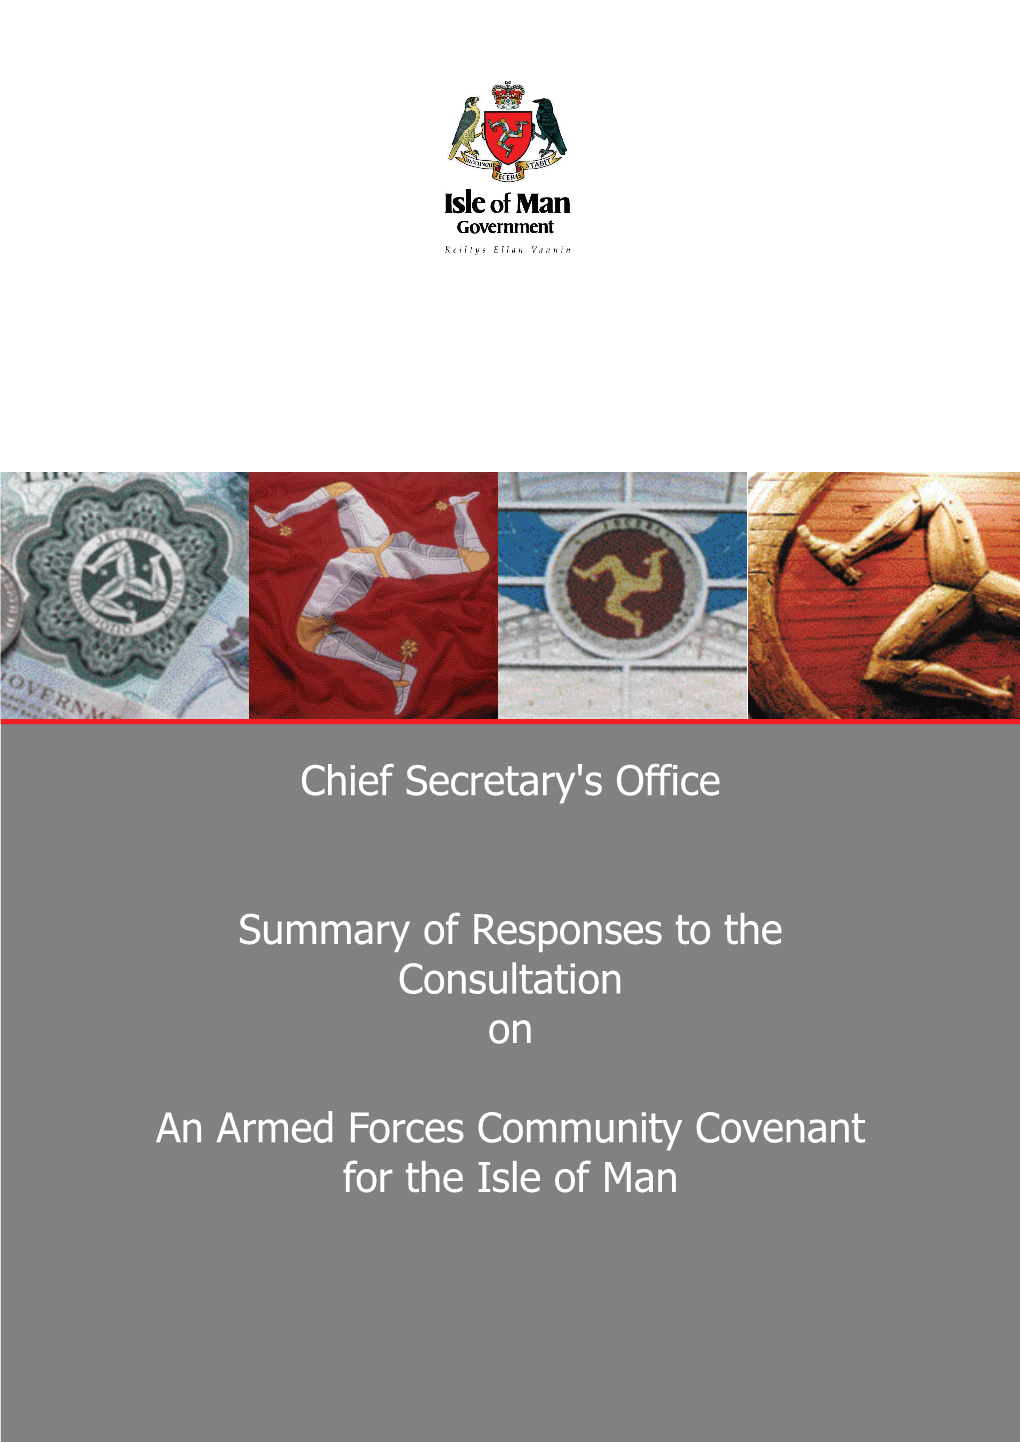 Armed Forces Covenant Summary of Responses